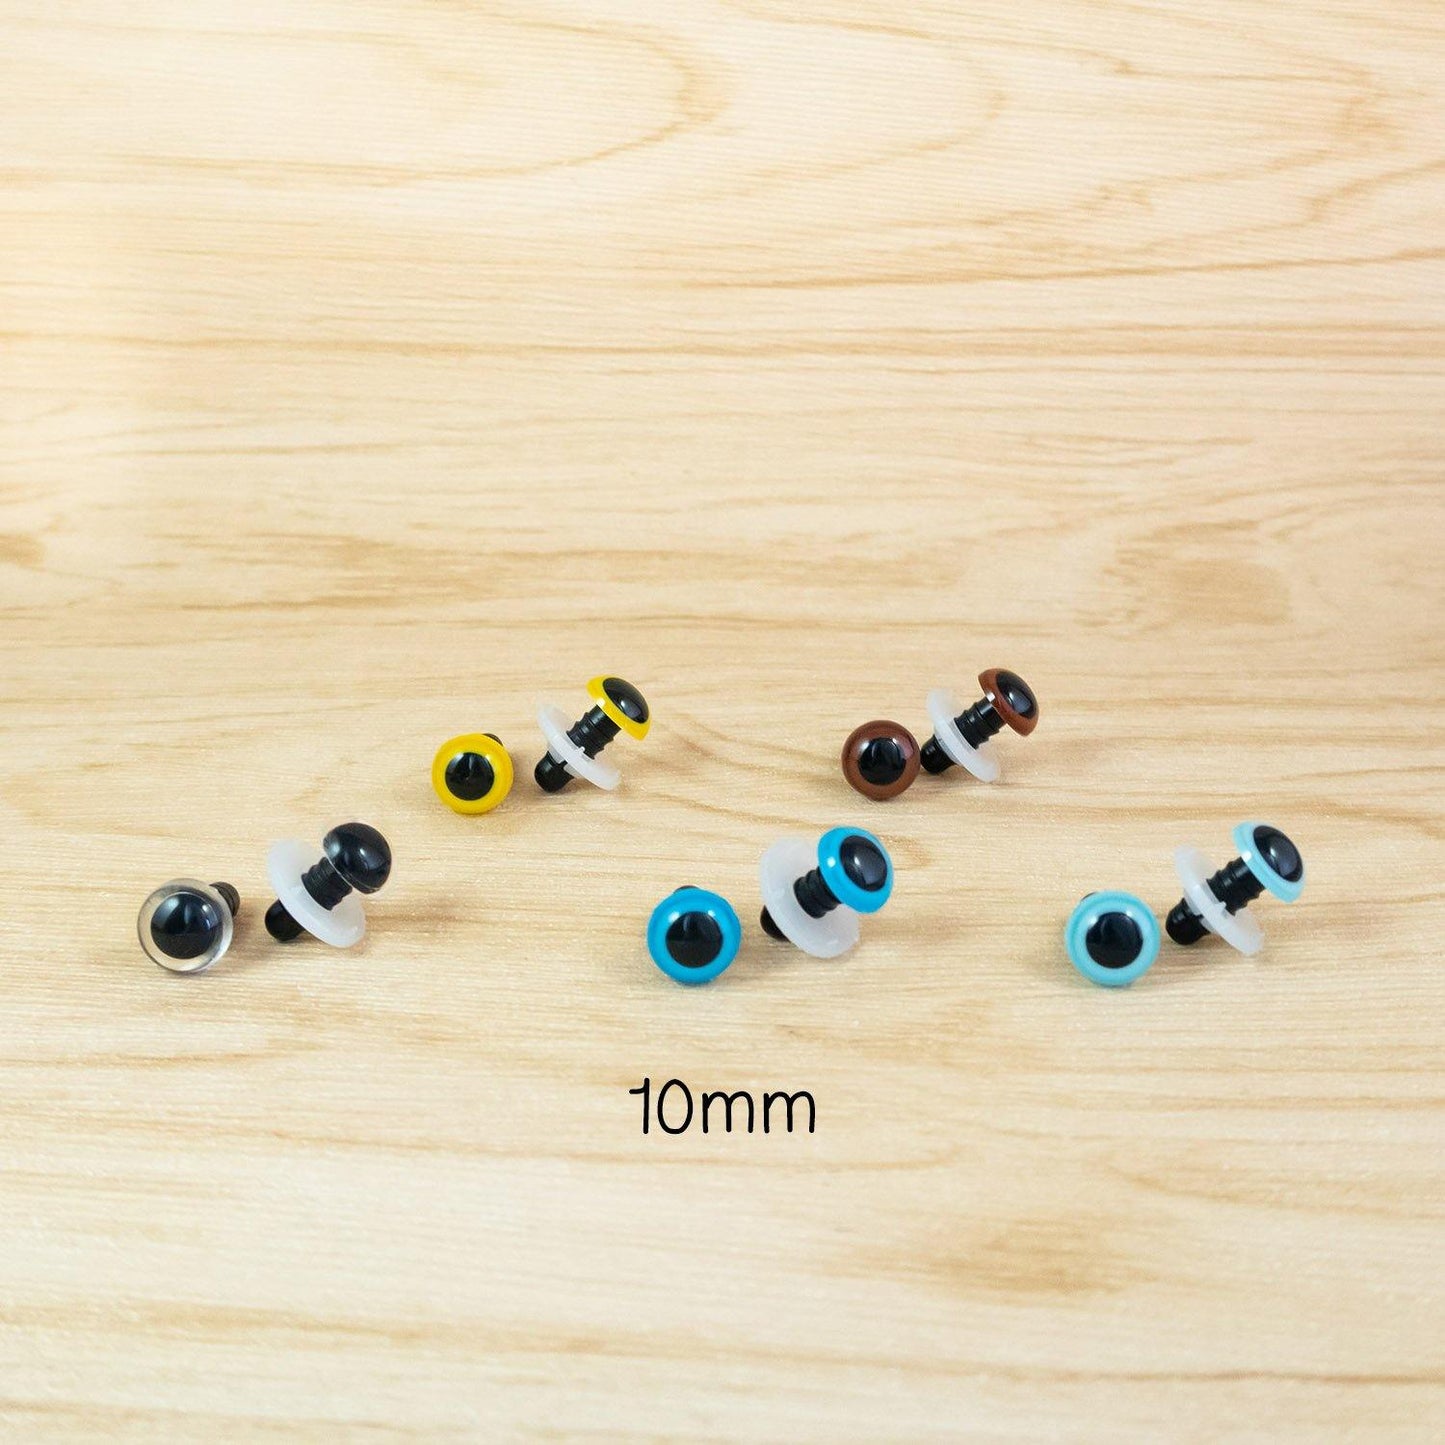 10mm craft eyes for handmade plush - yellow, brown, blue, clear